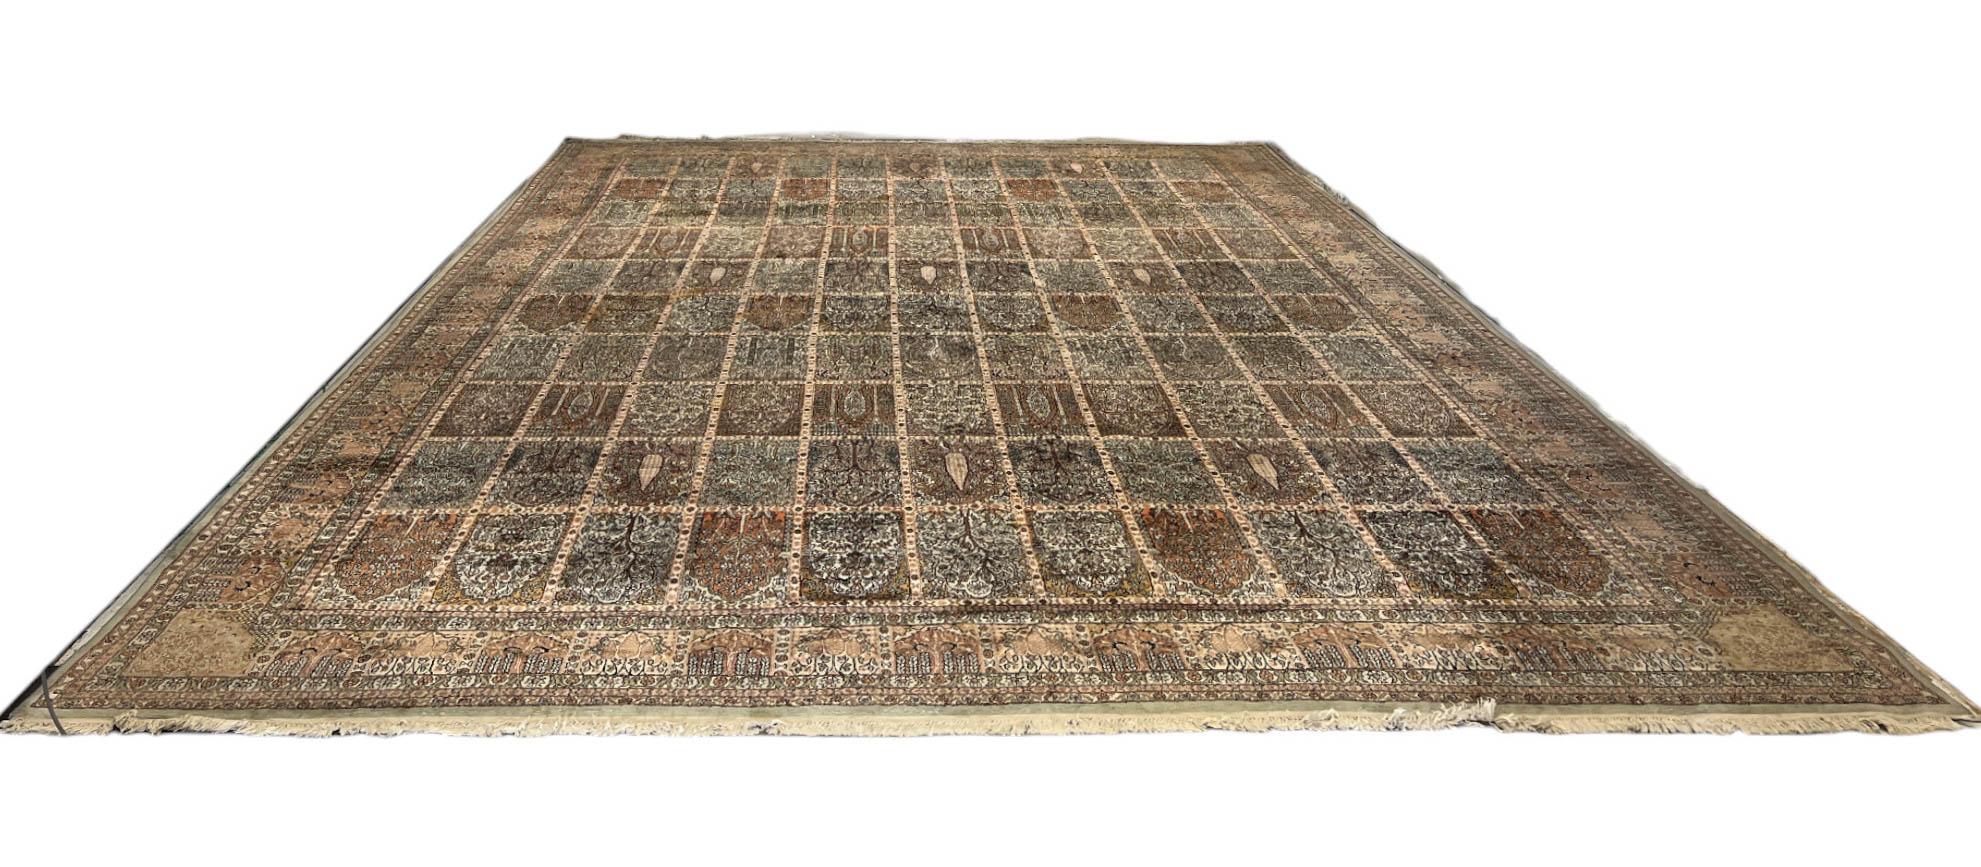 The rug is hand-knotted using Kashmir silk, showcasing exceptional craftsmanship that reflects the rich heritage of rug-making in the Kashmir region.  Due to the silk threads sheen, the rug displays slight variations in color depending on lighting